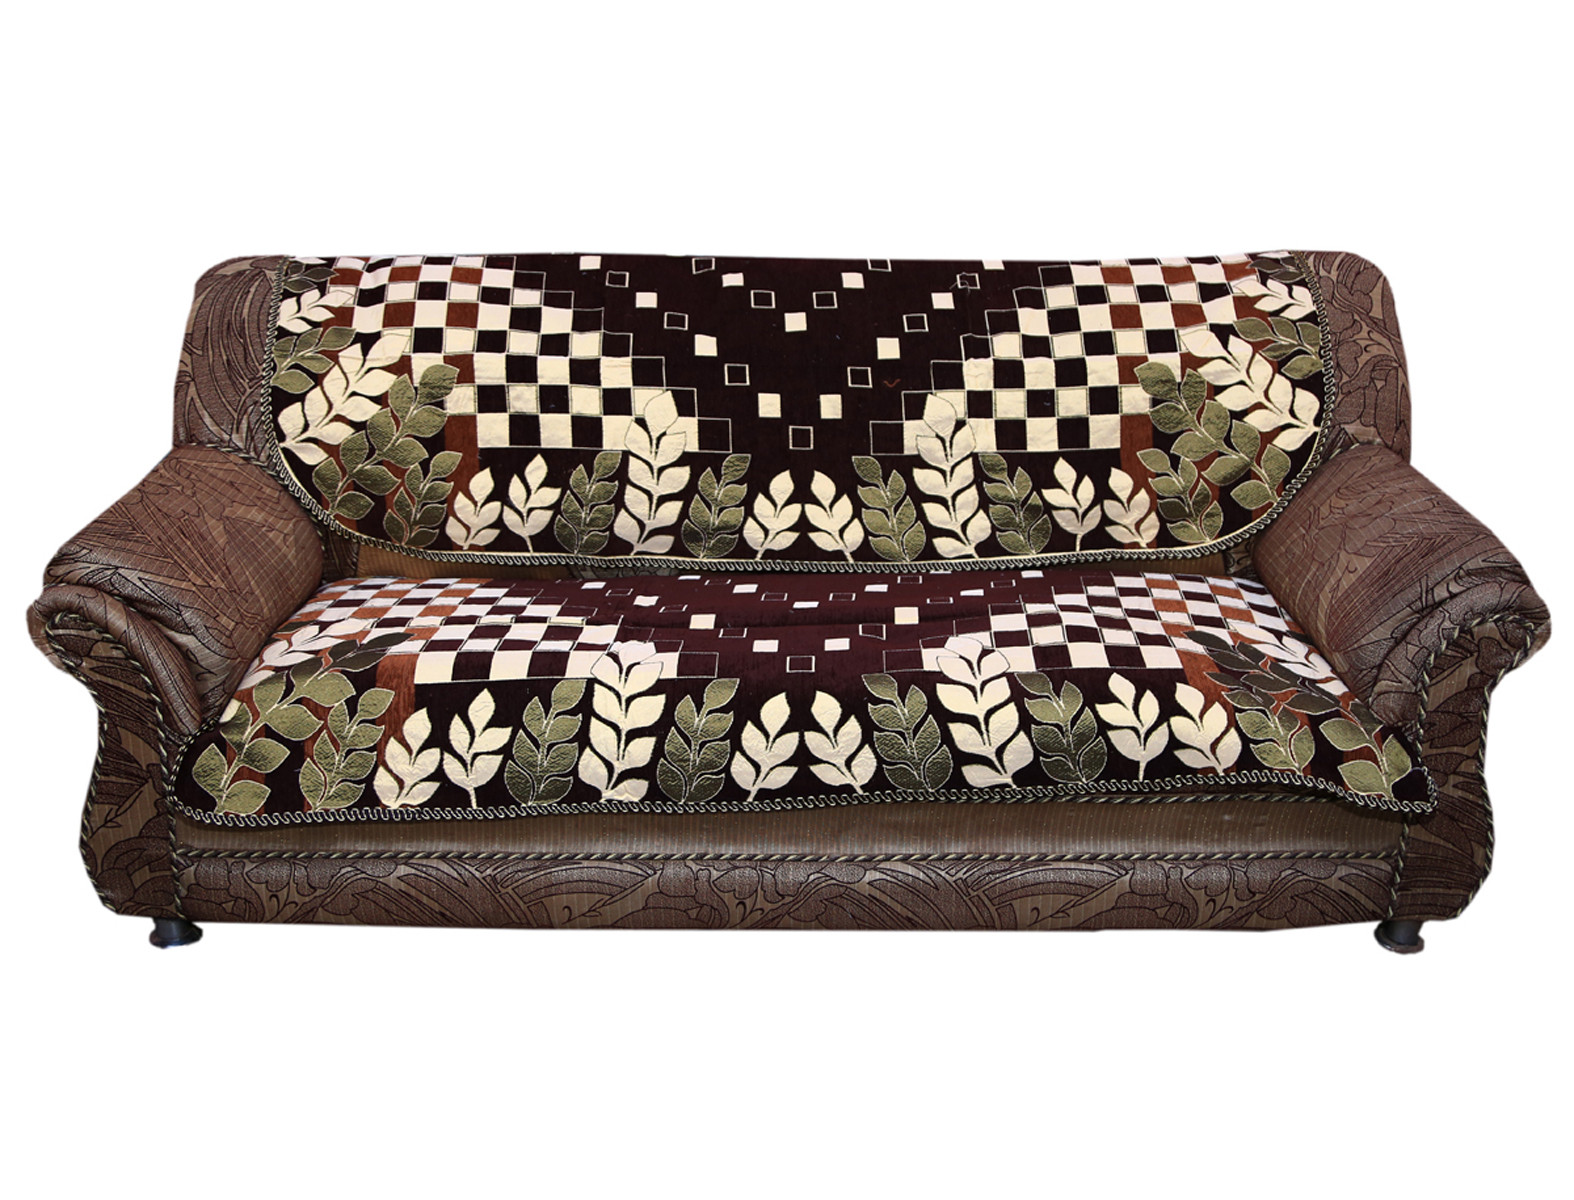 Kuber Industries Luxurious Cotton Floral Design 5 Seater Sofa Cover Set for Living Room (Brown)